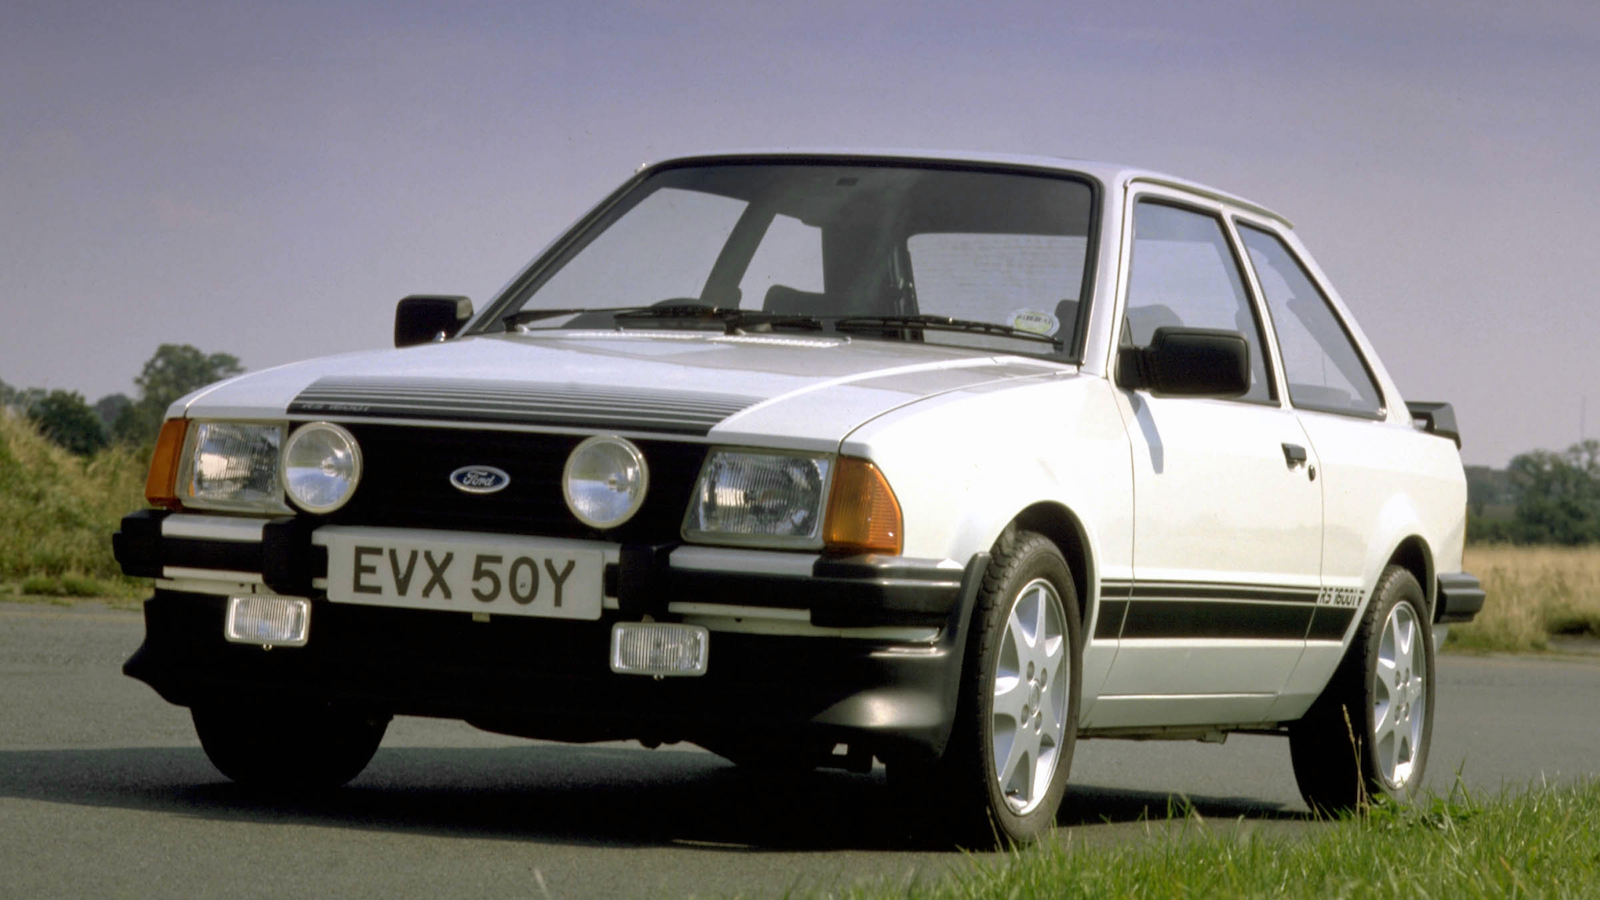 19 classics that don’t need an MOT in 2021